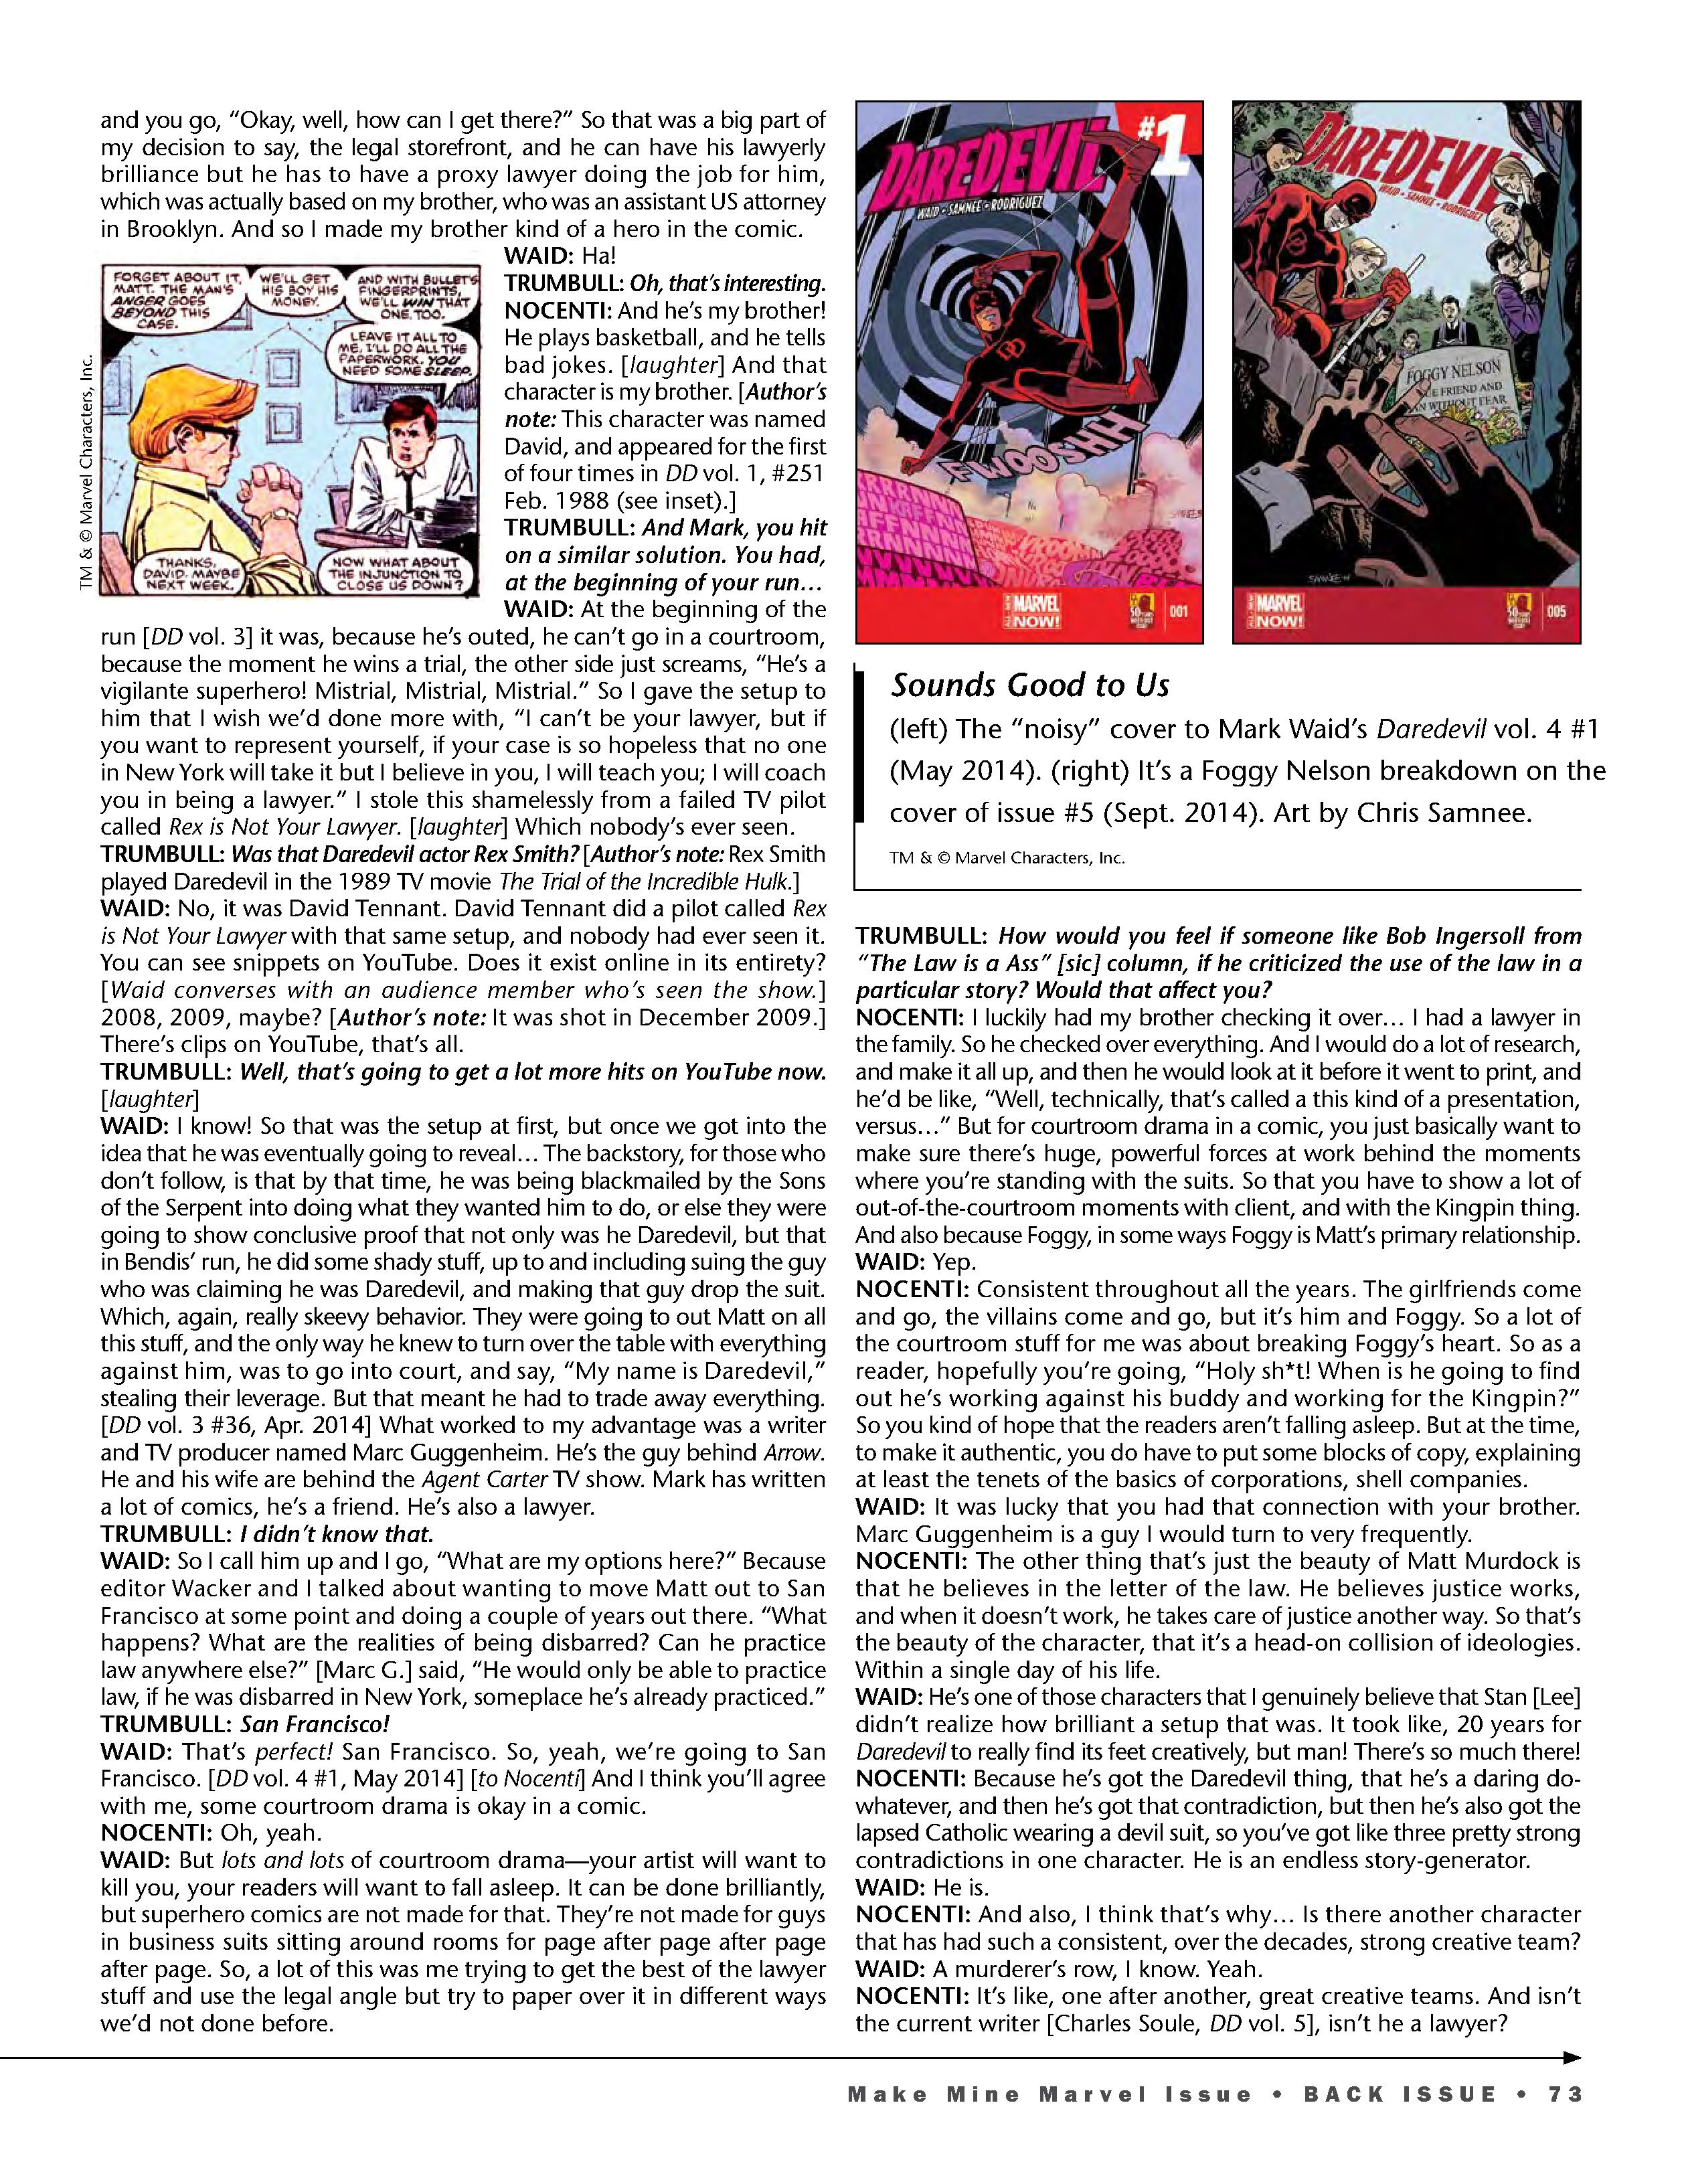 Read online Back Issue comic -  Issue #110 - 75